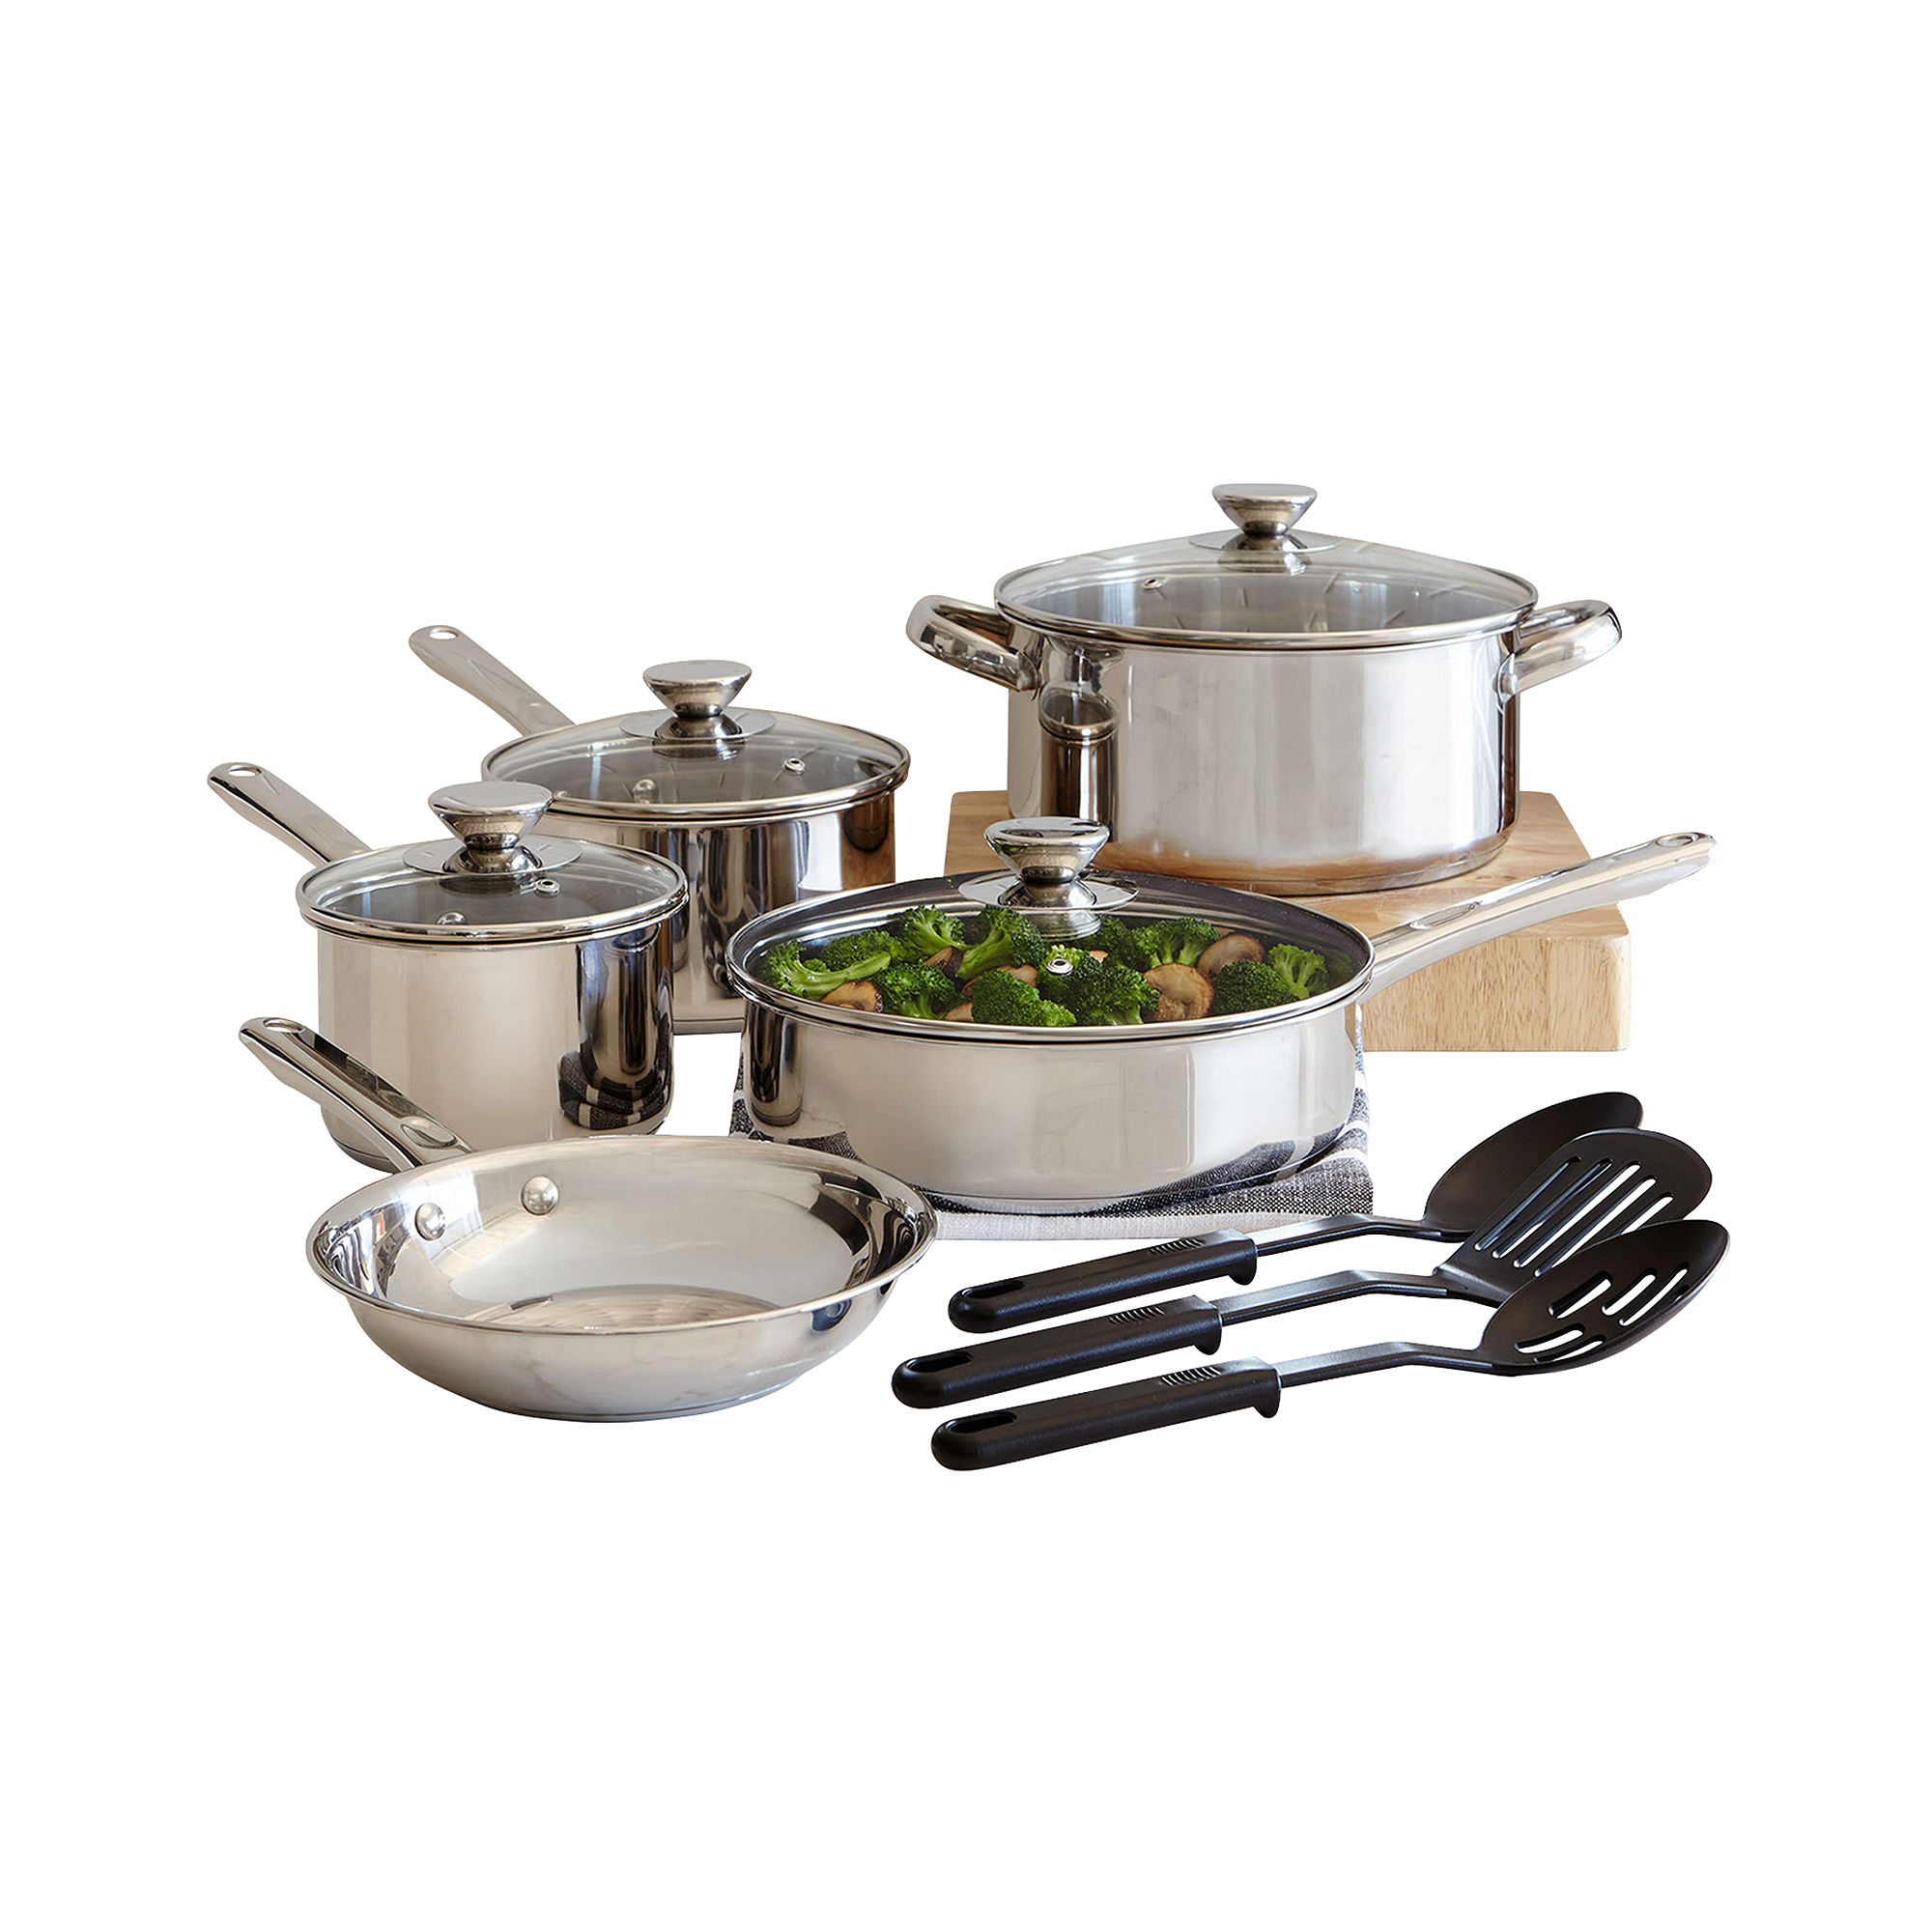 Cooks 12-pc. Stainless Steel Cookware Set